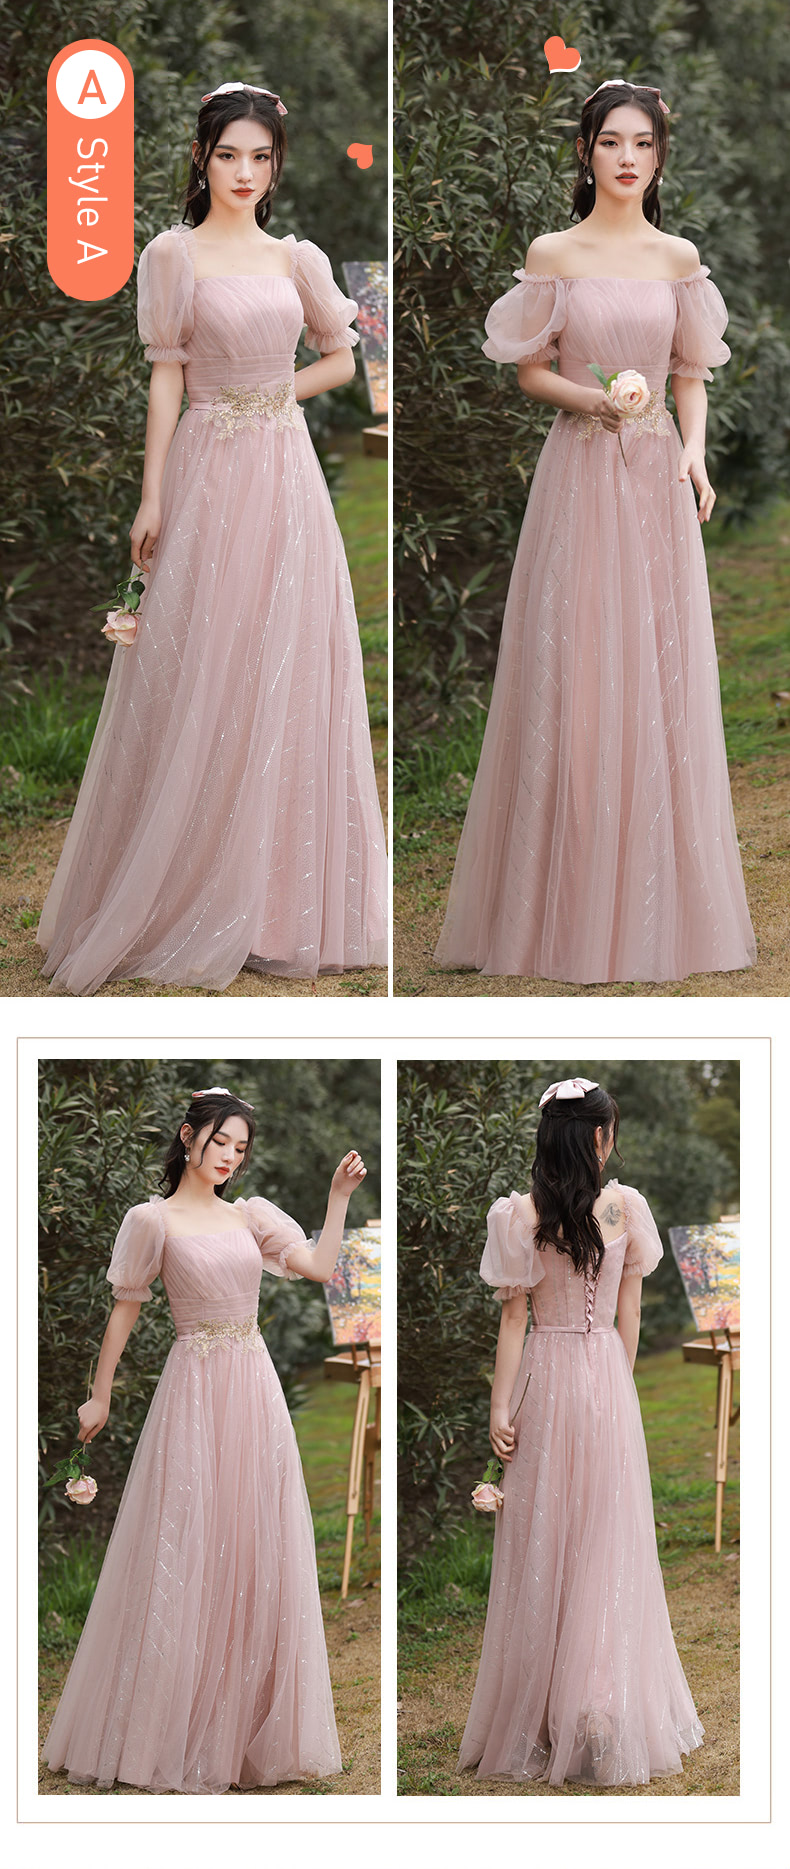 Fairy-Pink-Bridesmaid-Dress-with-Sleeves-Chiffon-Long-Casual-Gown18.jpg